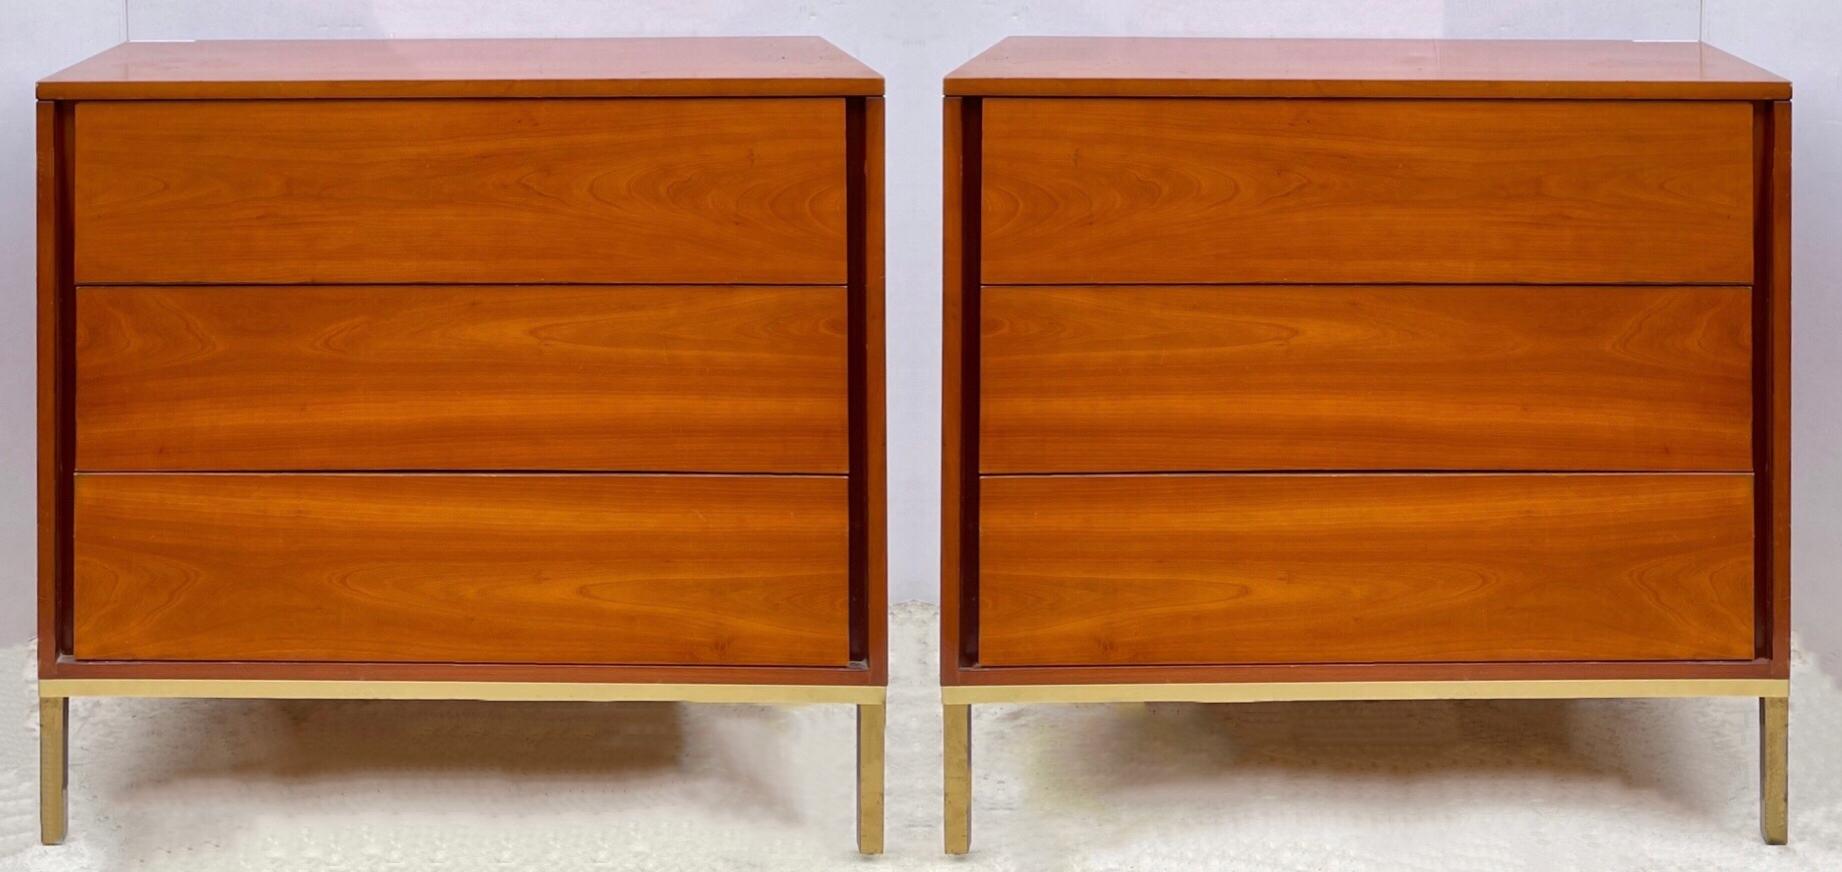 20th Century Mid-Century Modern Walnut and Brass Chests by John Stuart, Pair For Sale